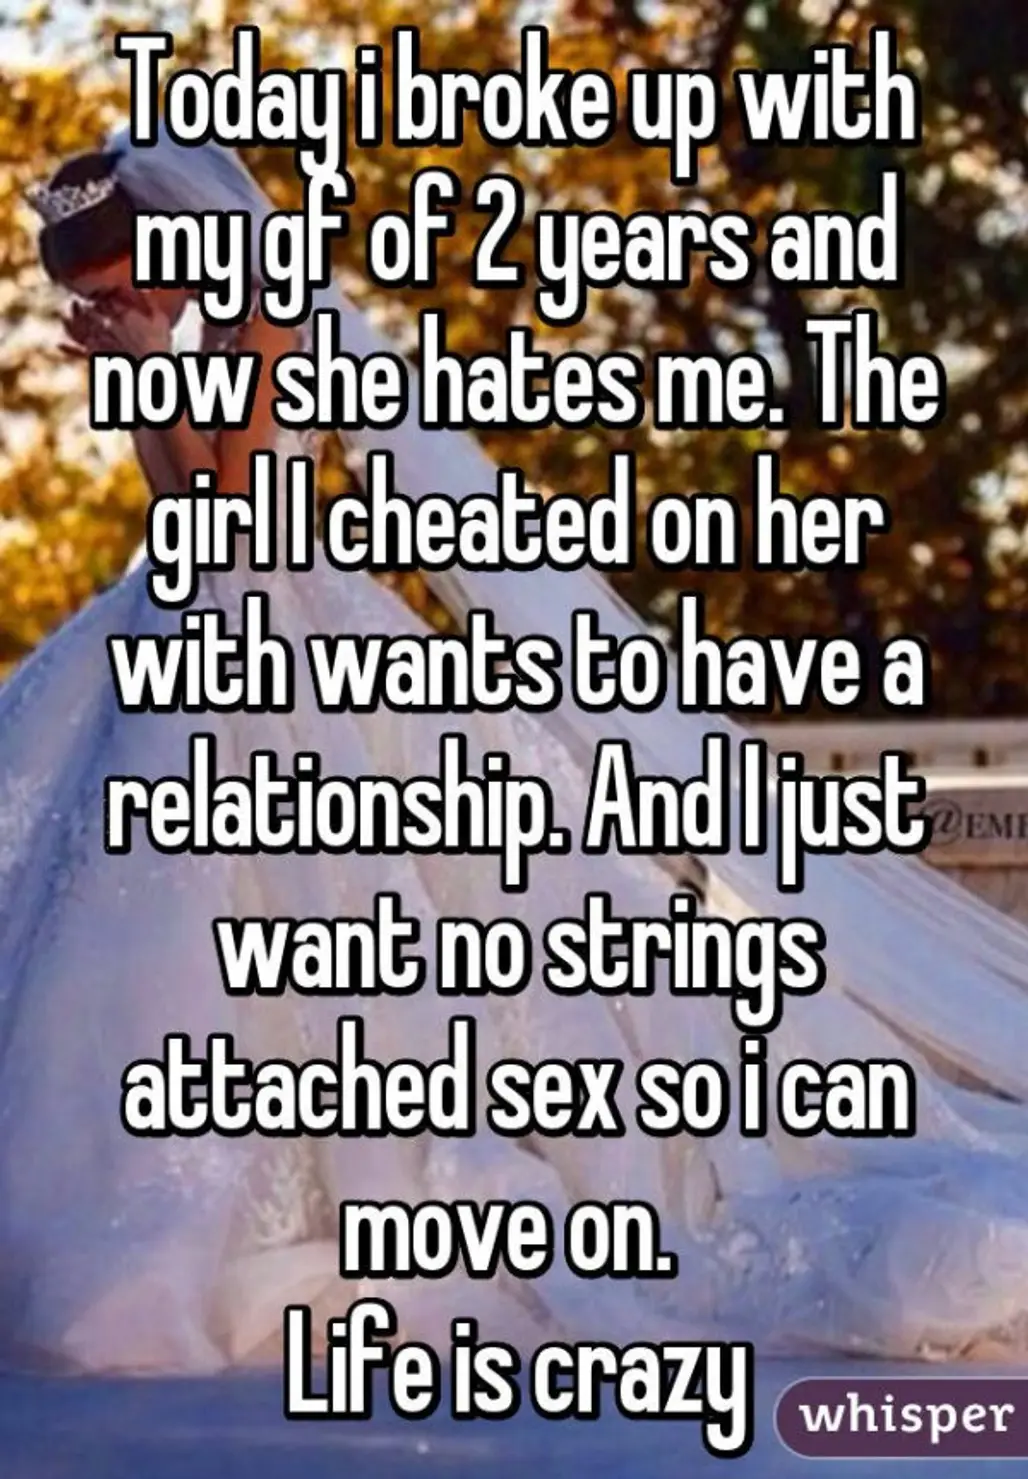 No Strings Attached Sex .. Seriously?